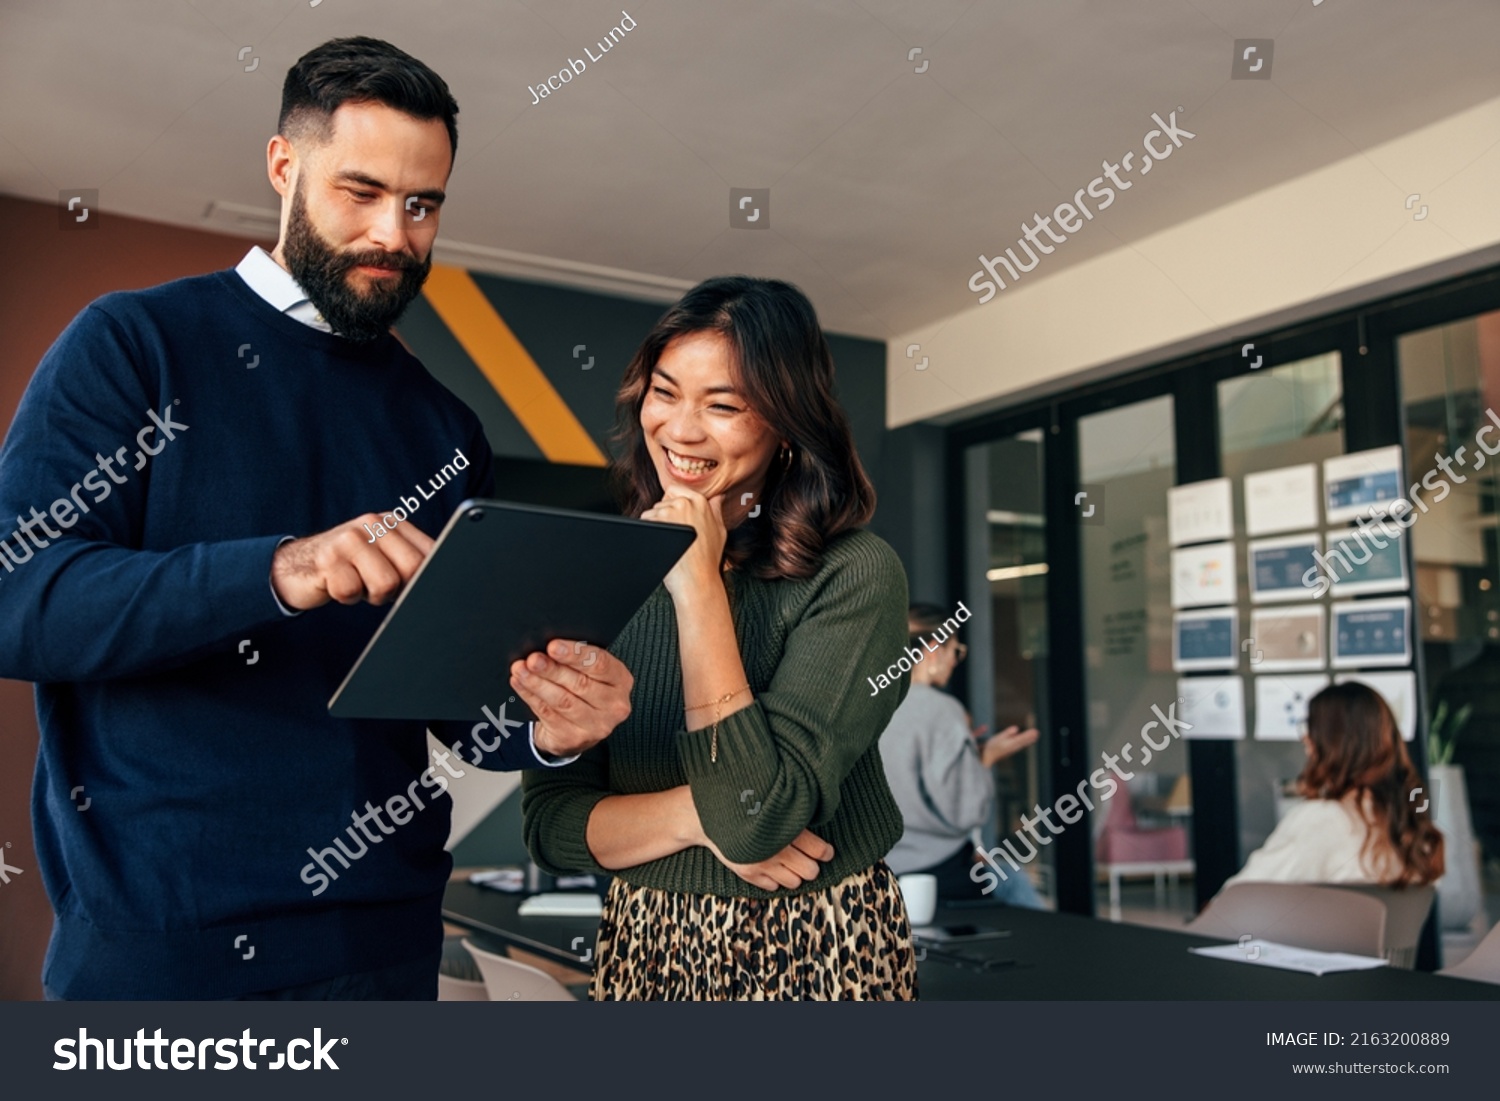 Happy business colleagues using a digital tablet in a boardroom. Two young businesspeople having a discussion during a meeting. Diverse entrepreneurs working together as a team. #2163200889